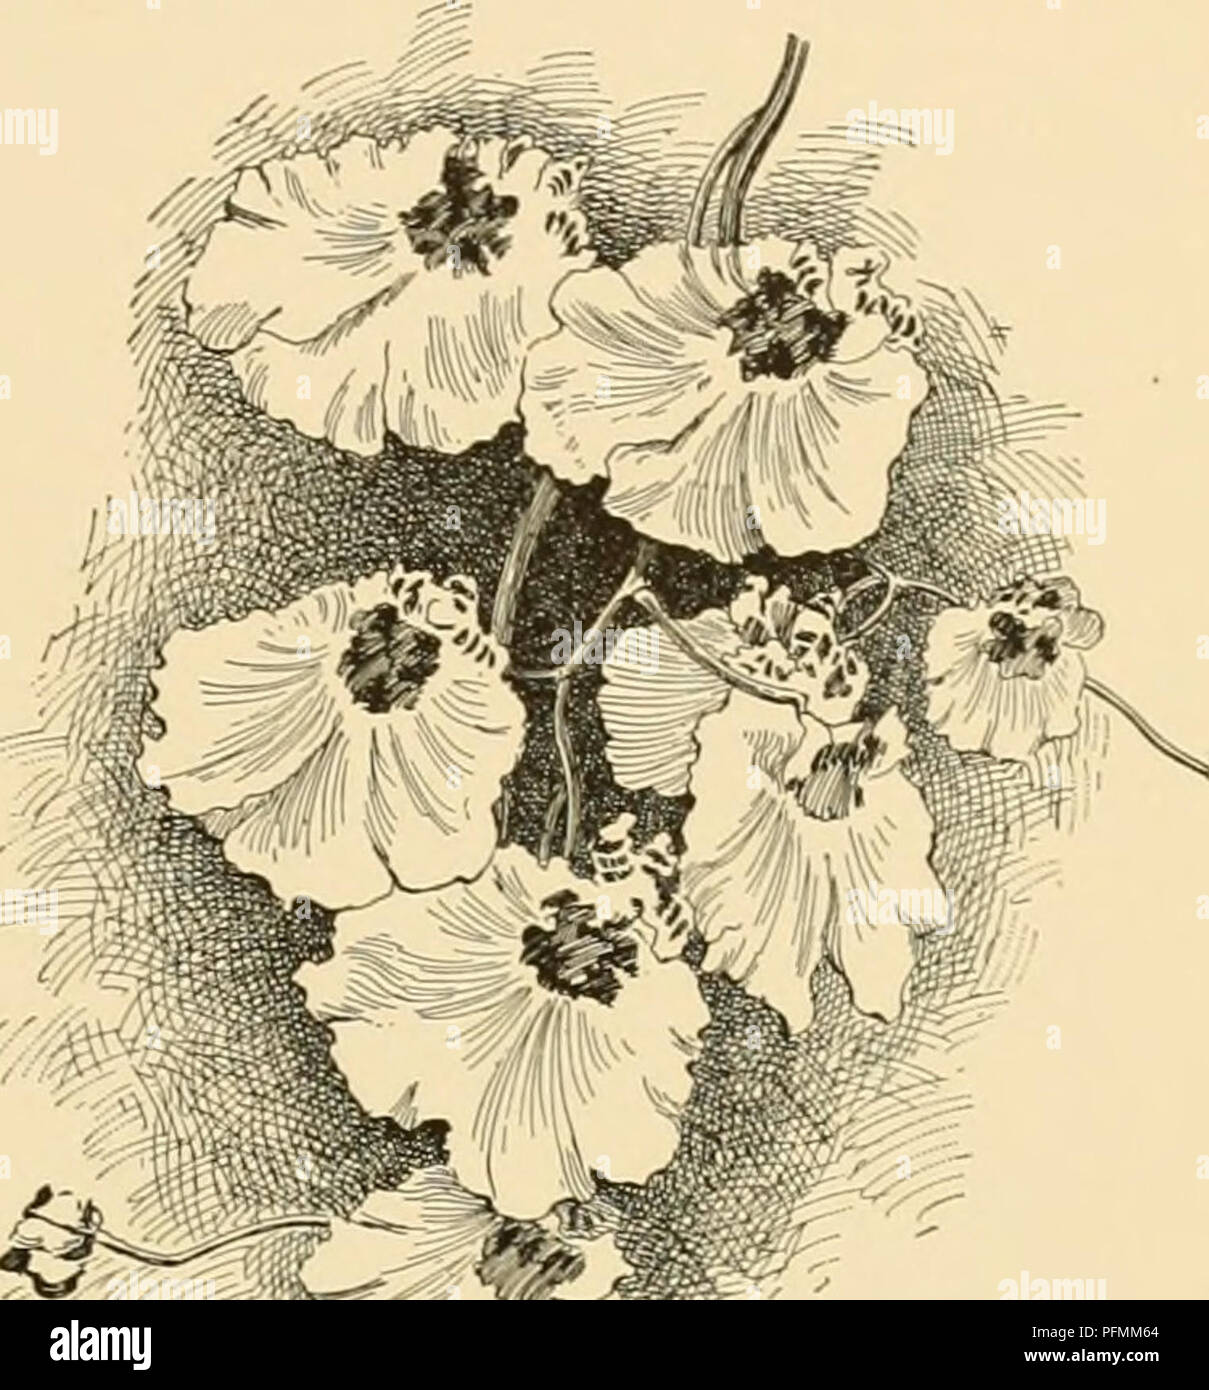 . Cyclopedia of American horticulture : comprising suggestions for cultivation of horticultural plants, descriptions of the species of fruits, vegetables, flowers, and ornamental plants sold in the United States and Canada, together with geographical and biographical sketches. Gardening; Horticulture; Horticulture; Horticulture. ONCIDIUM 6. MarshaUiJLnum, Reichb. f. Pseudobulbs ovoid, 2-4 in. long: Ivs. narrowly oblong, G-8 in. long: fls. nu- merous, 2% in. across, borne on a stout panicle 1-2 ft. high; the upper sepals oblong apiculate, the lateral ones united, yellow, with purplish bands pet Stock Photo